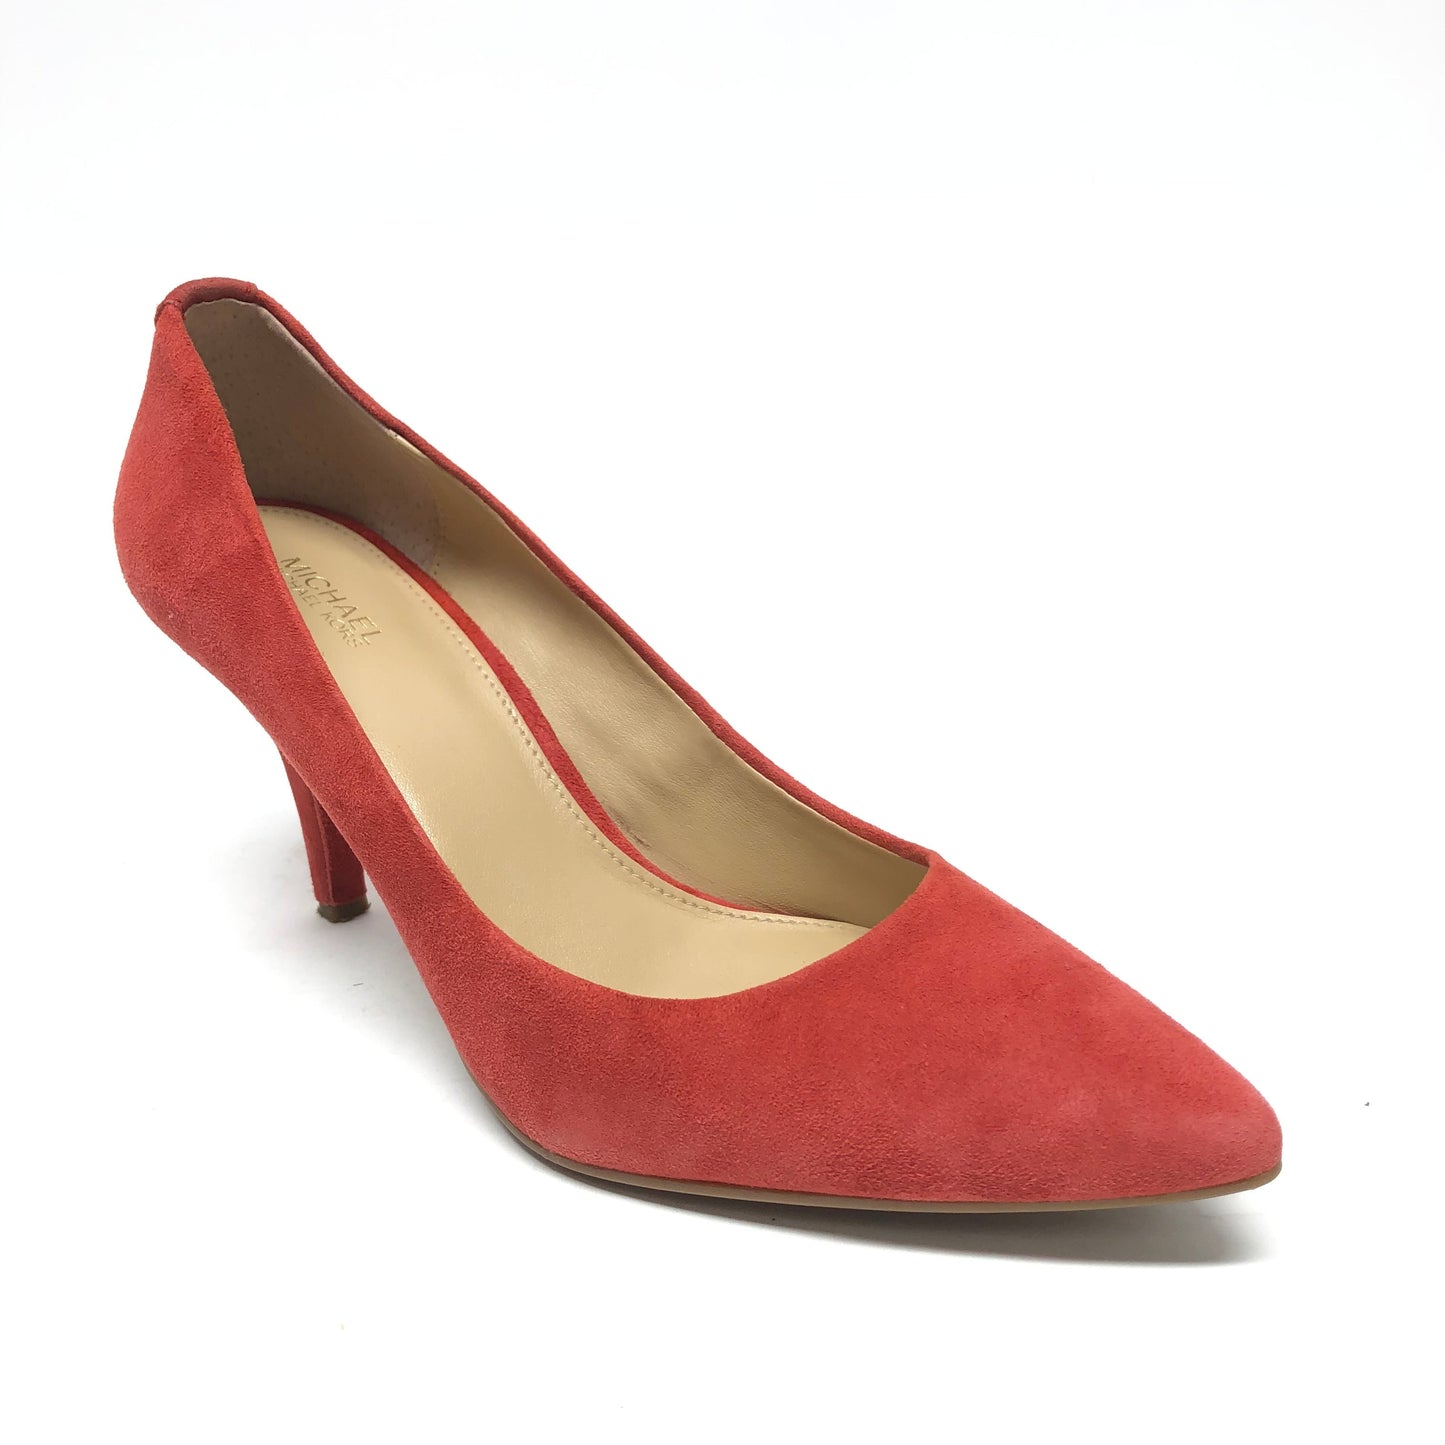 Red Shoes Heels Stiletto Michael By Michael Kors, Size 8